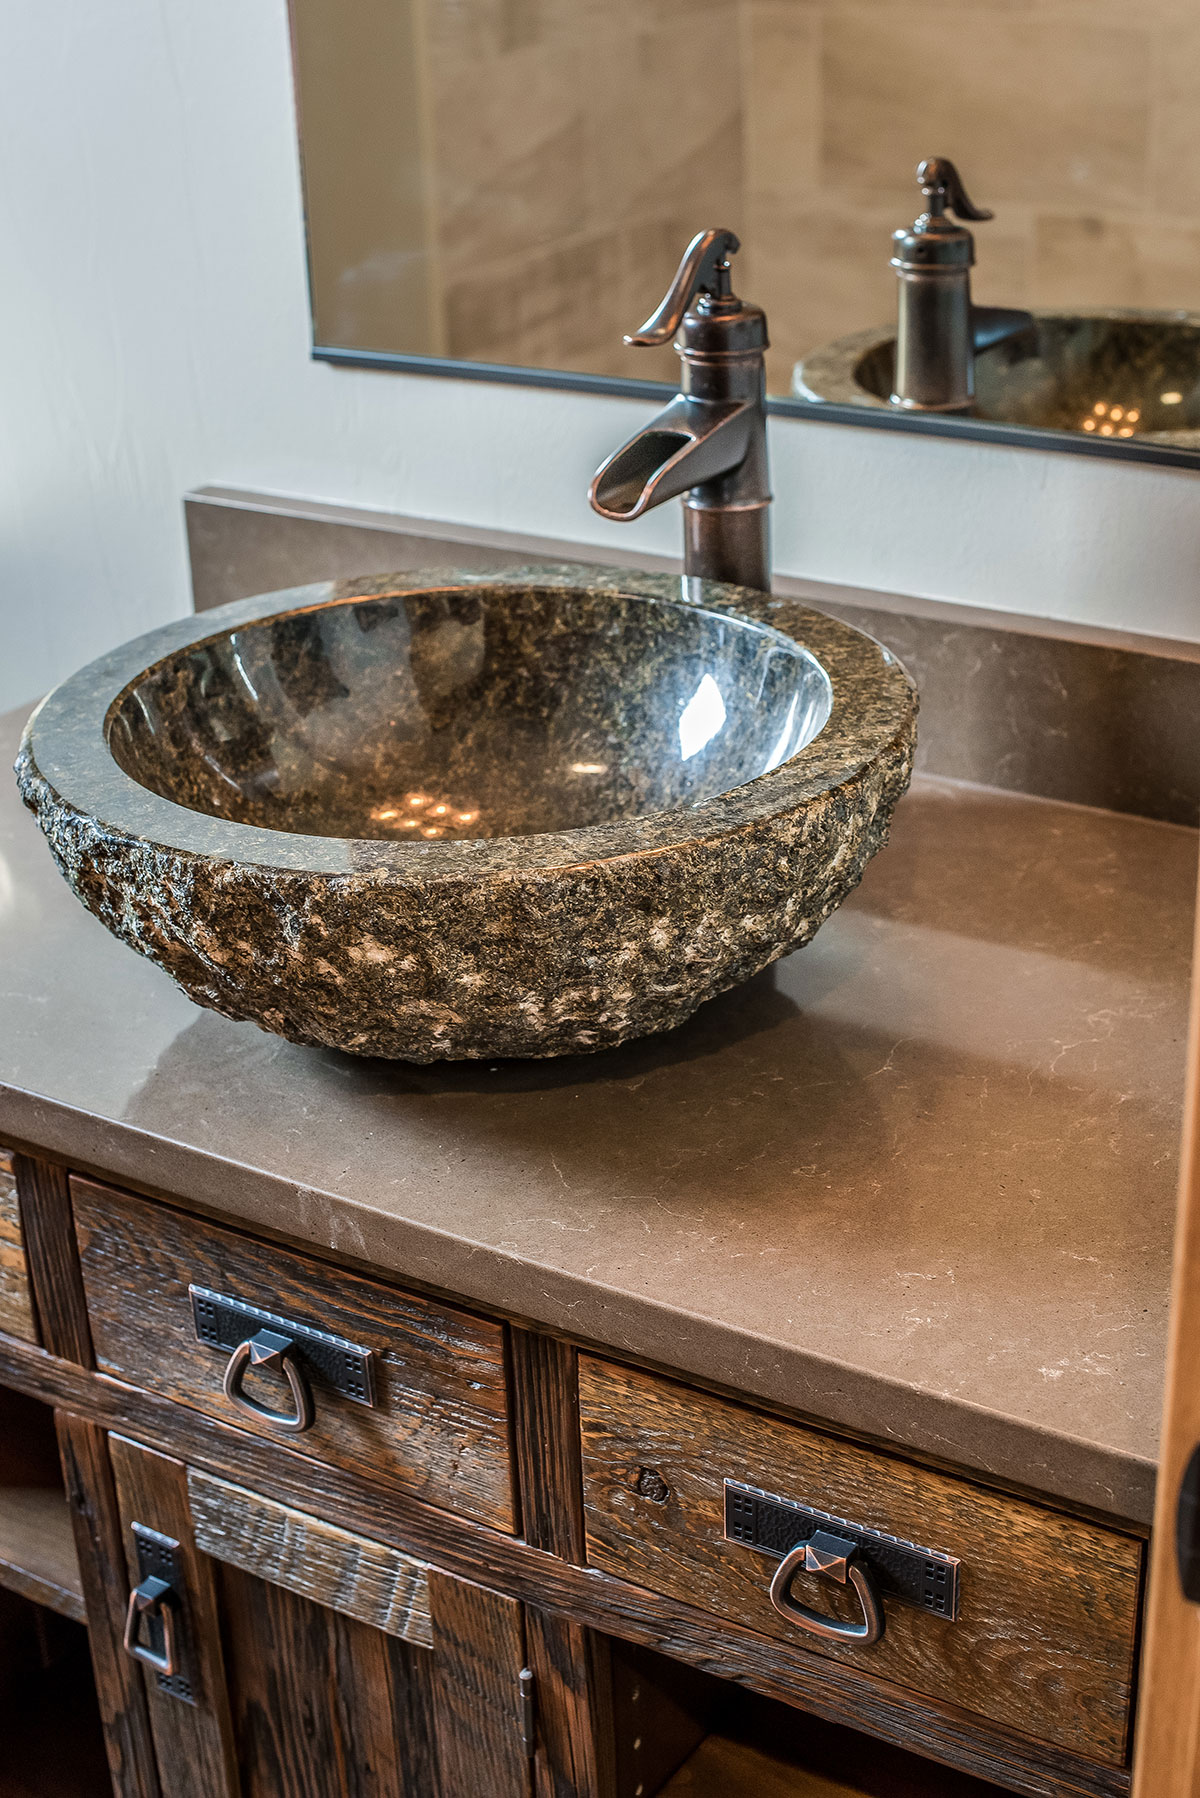 Vanity with rustic cabinets and granite countertop with a large carved rock basin sink and waterfall faucet in below a mirror